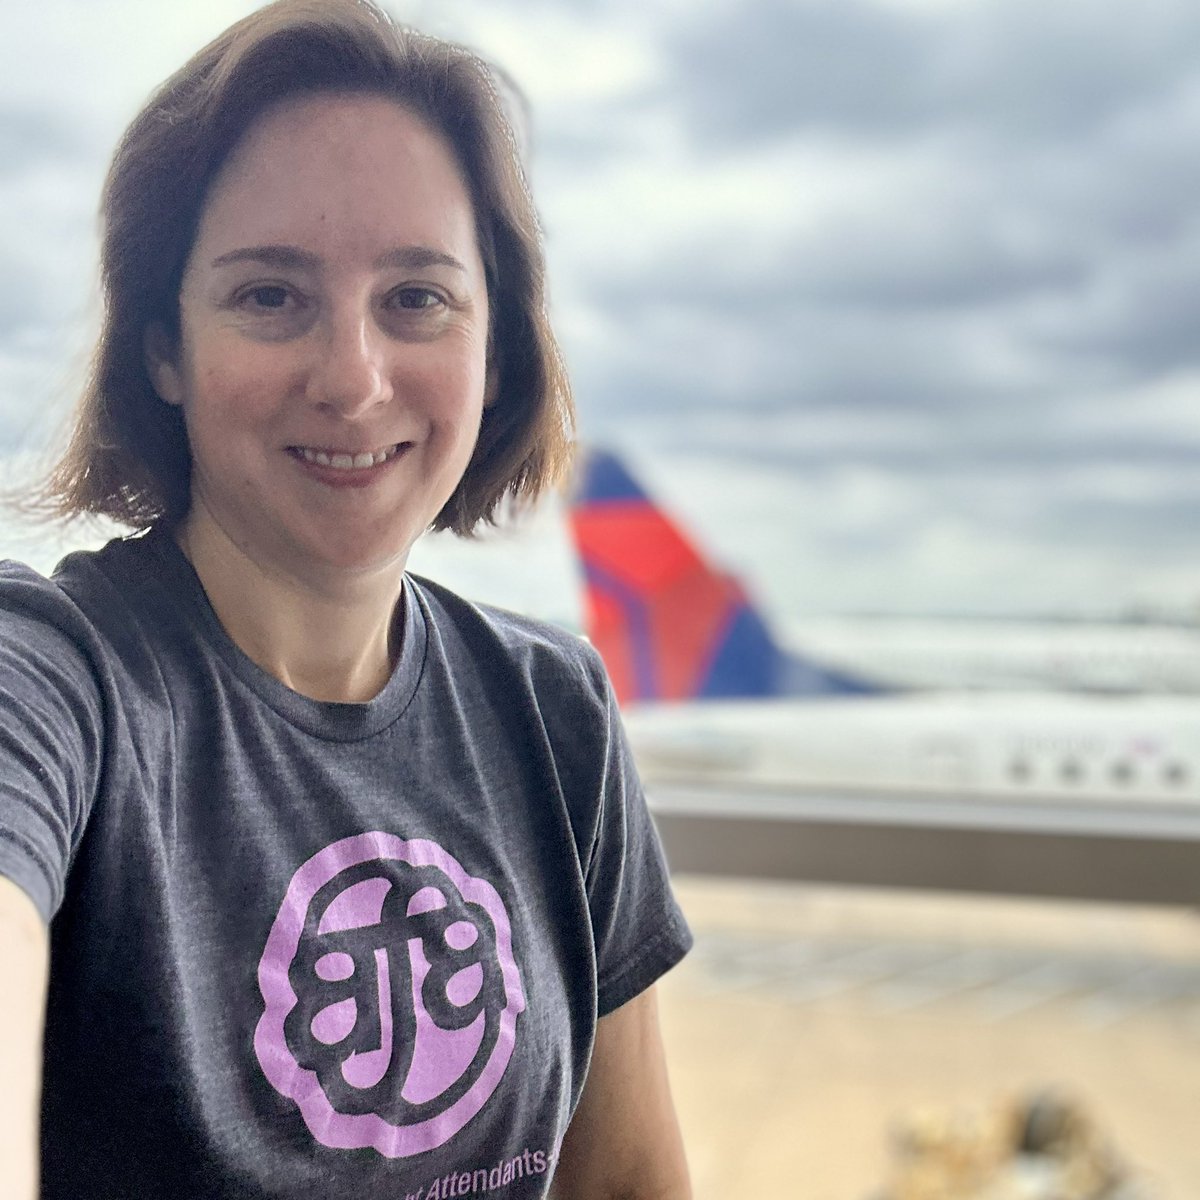 #UnionStrong! Wearing my @DeltaAFA shirt in solidarity with the ~24K flight attendants organizing to form their @DeltaAFA union. #1u #UnionStrong @afa_cwa